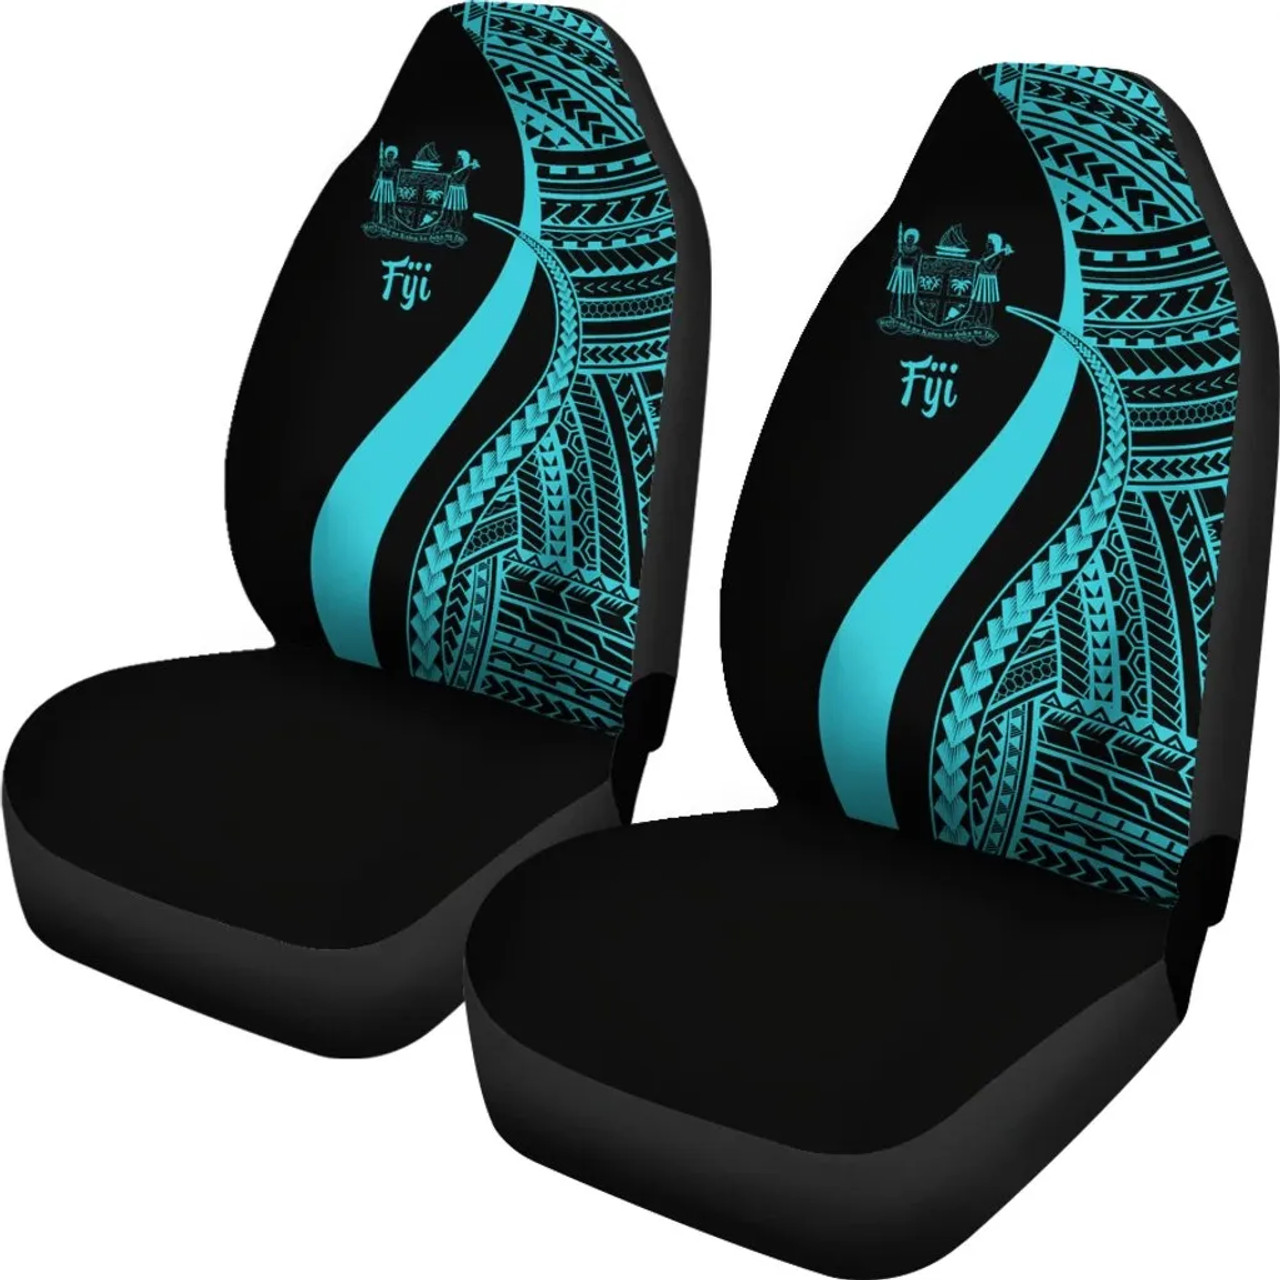 Fiji Car Seat Covers - Turquoise Polynesian Tentacle Tribal Pattern Crest